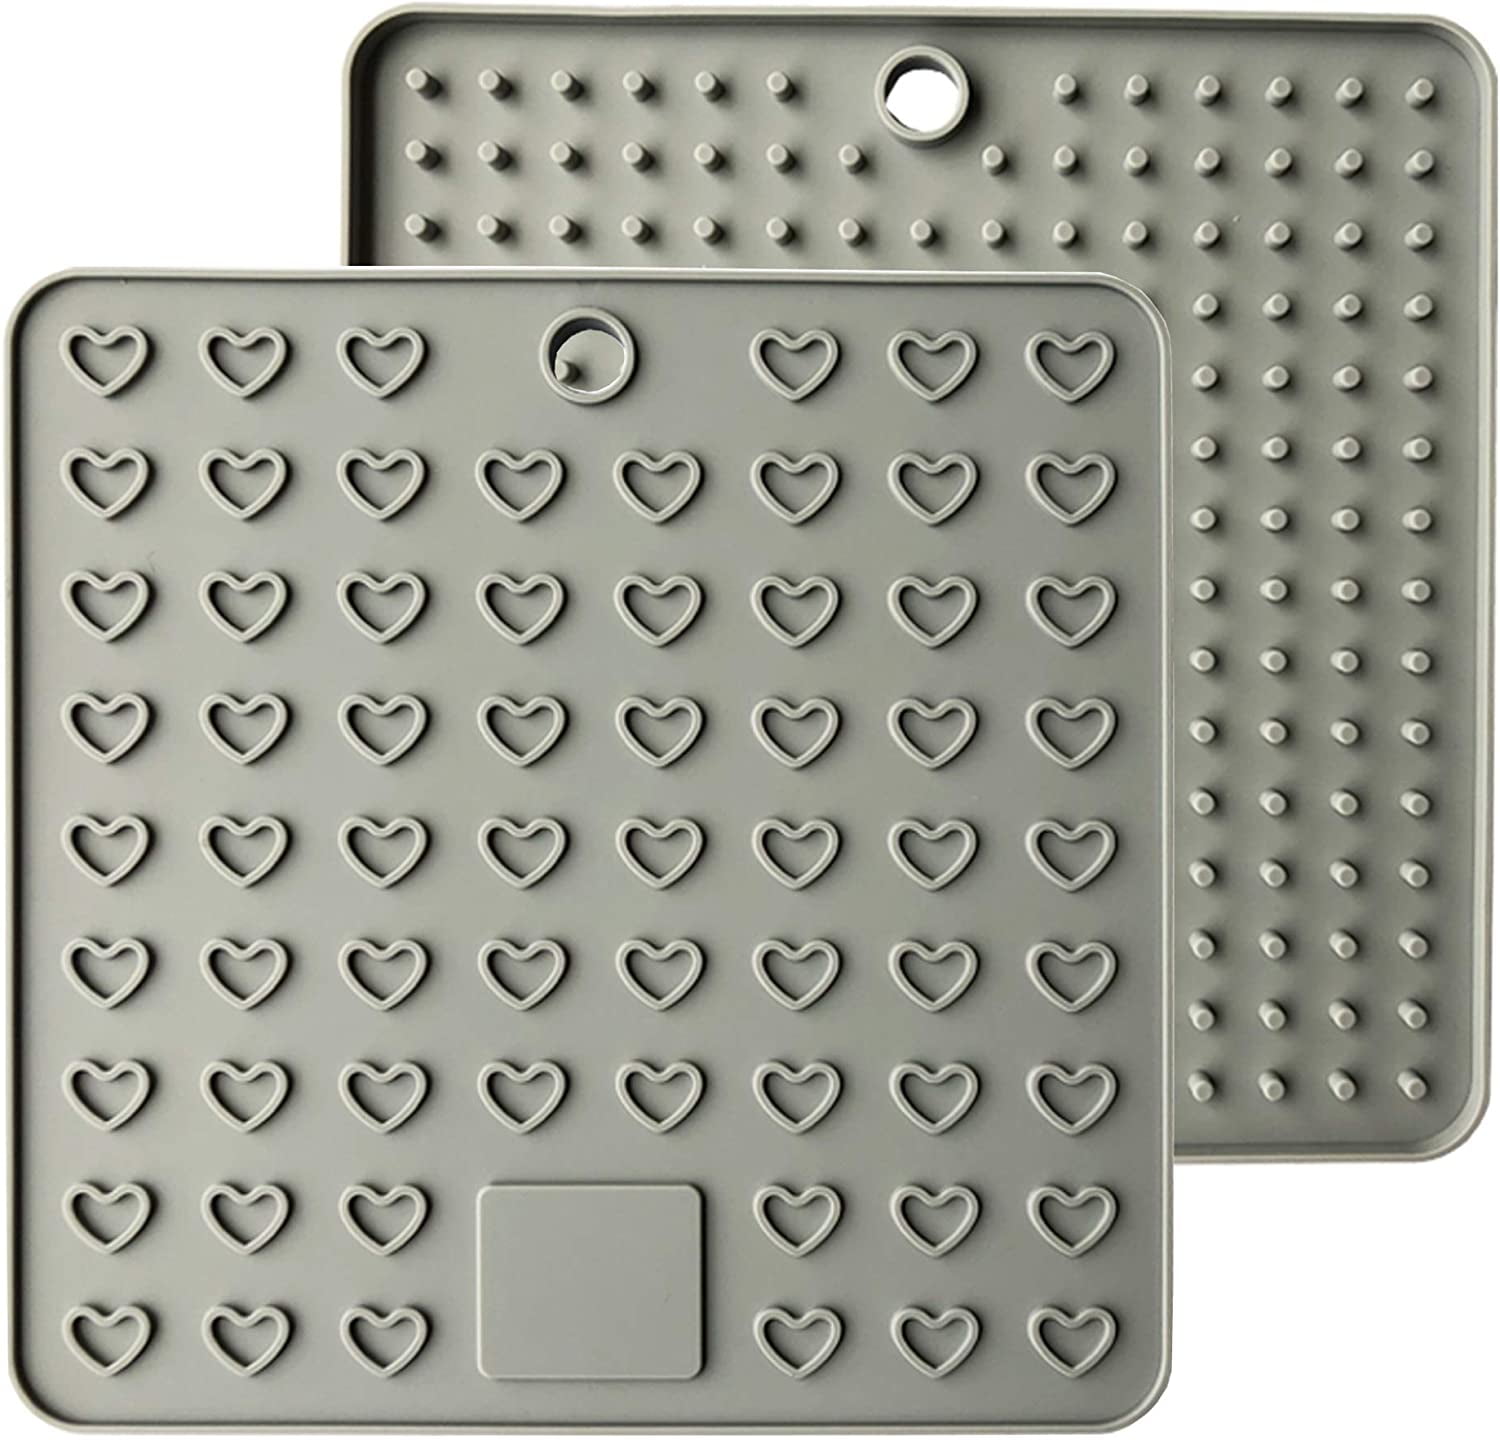 Silicone Grid Trivet Pot Holder - Silicone Zone Life is Art!